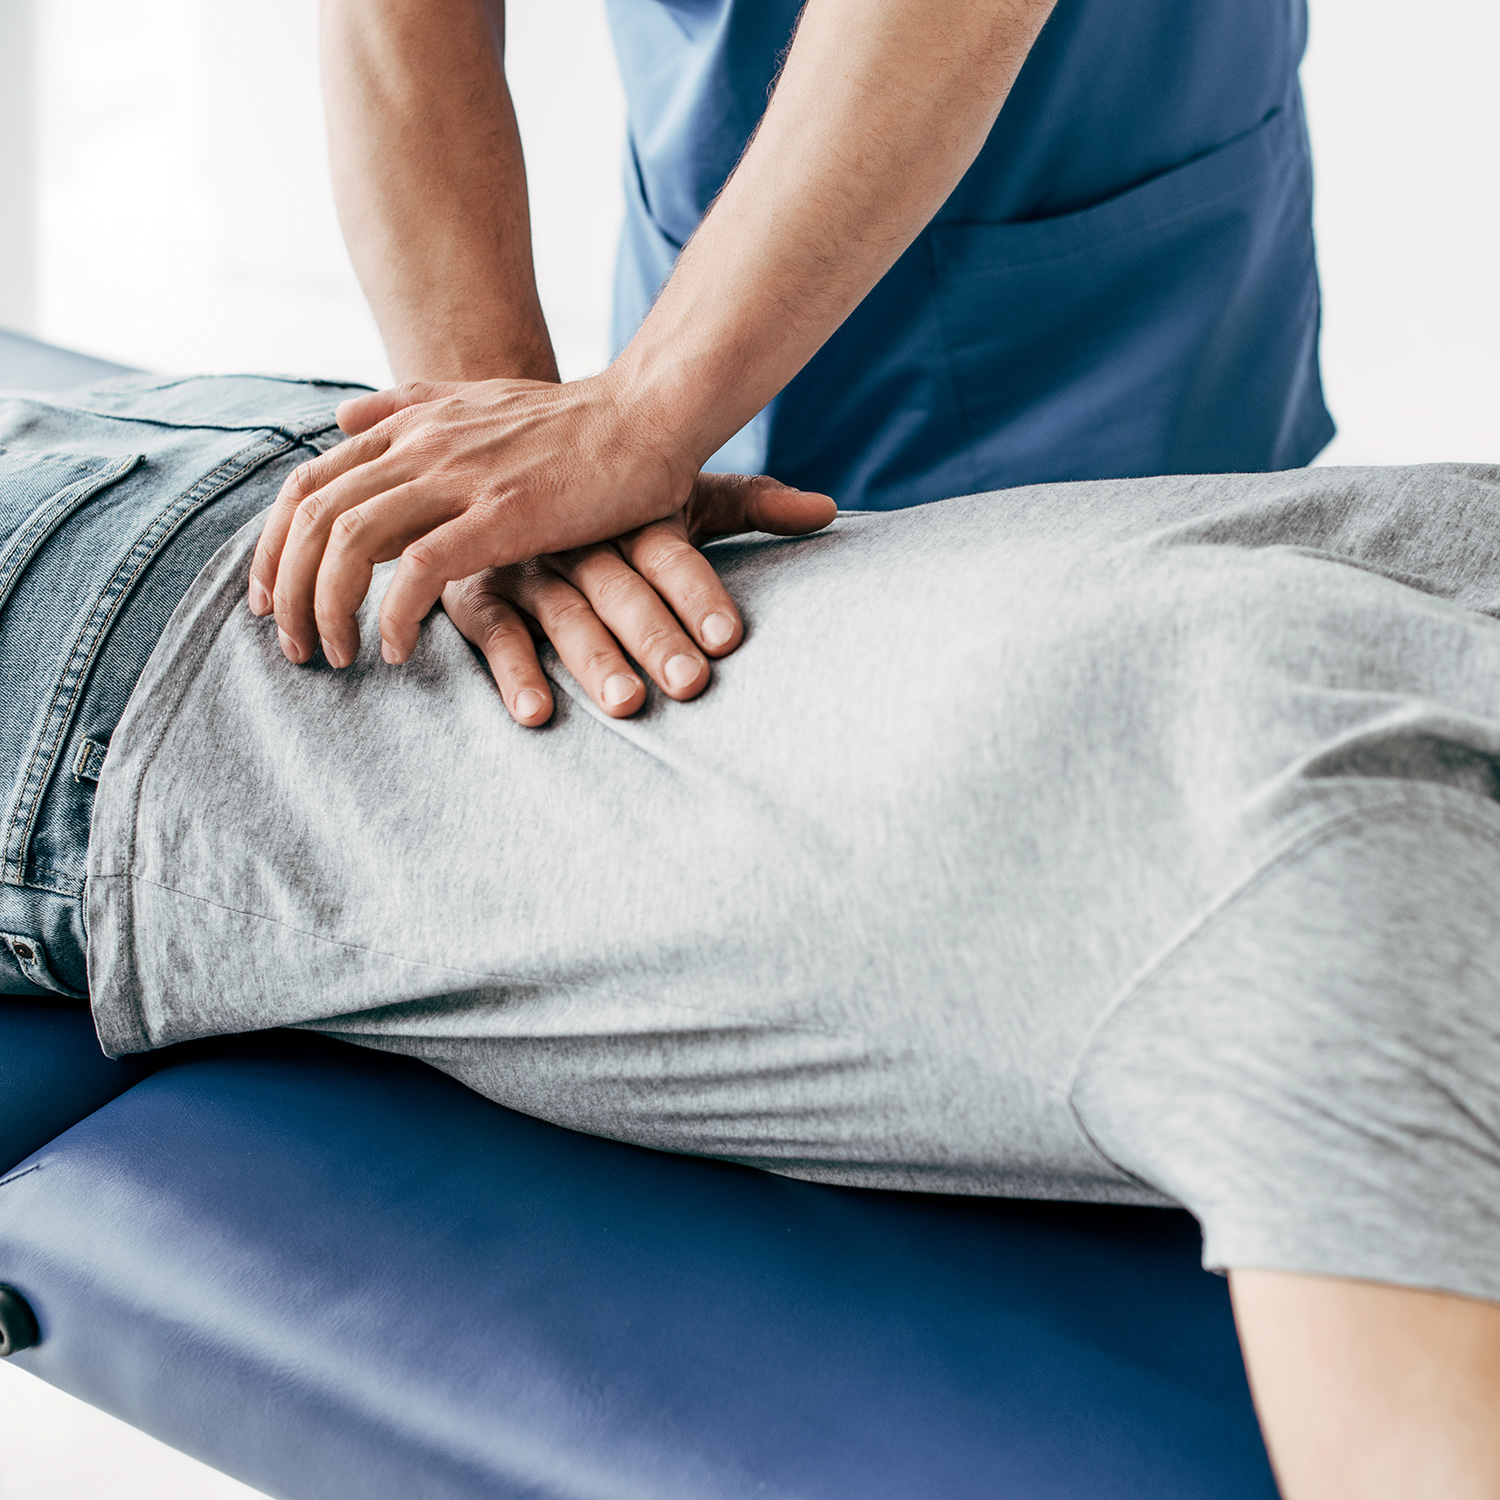 Spinal Manipulation: What You Need To Know | NCCIH